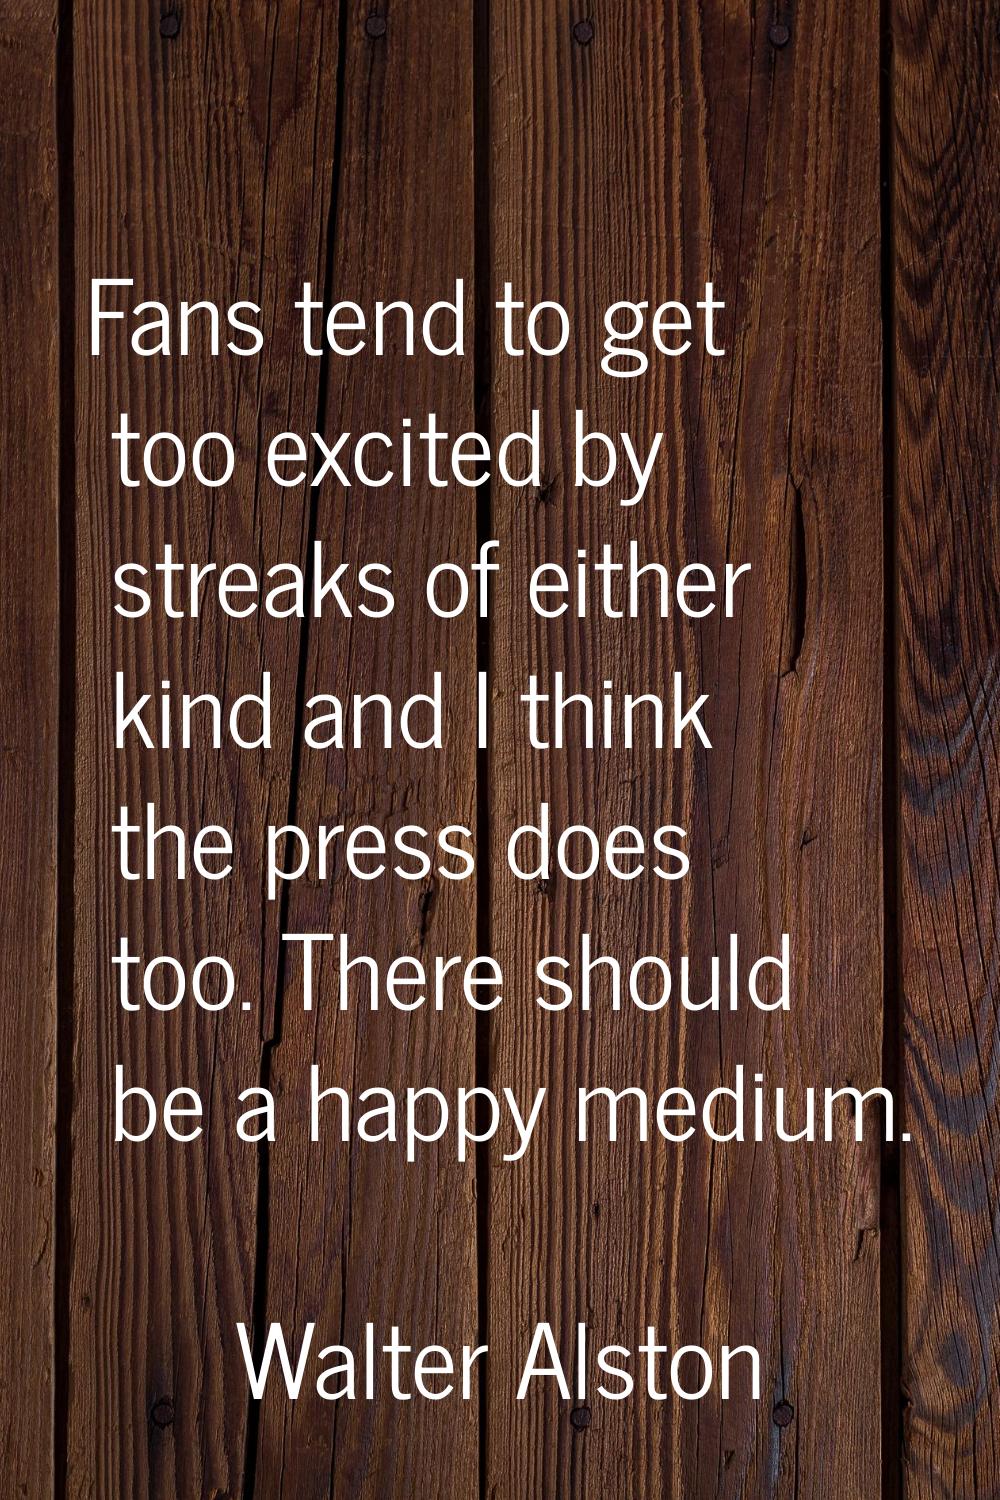 Fans tend to get too excited by streaks of either kind and I think the press does too. There should